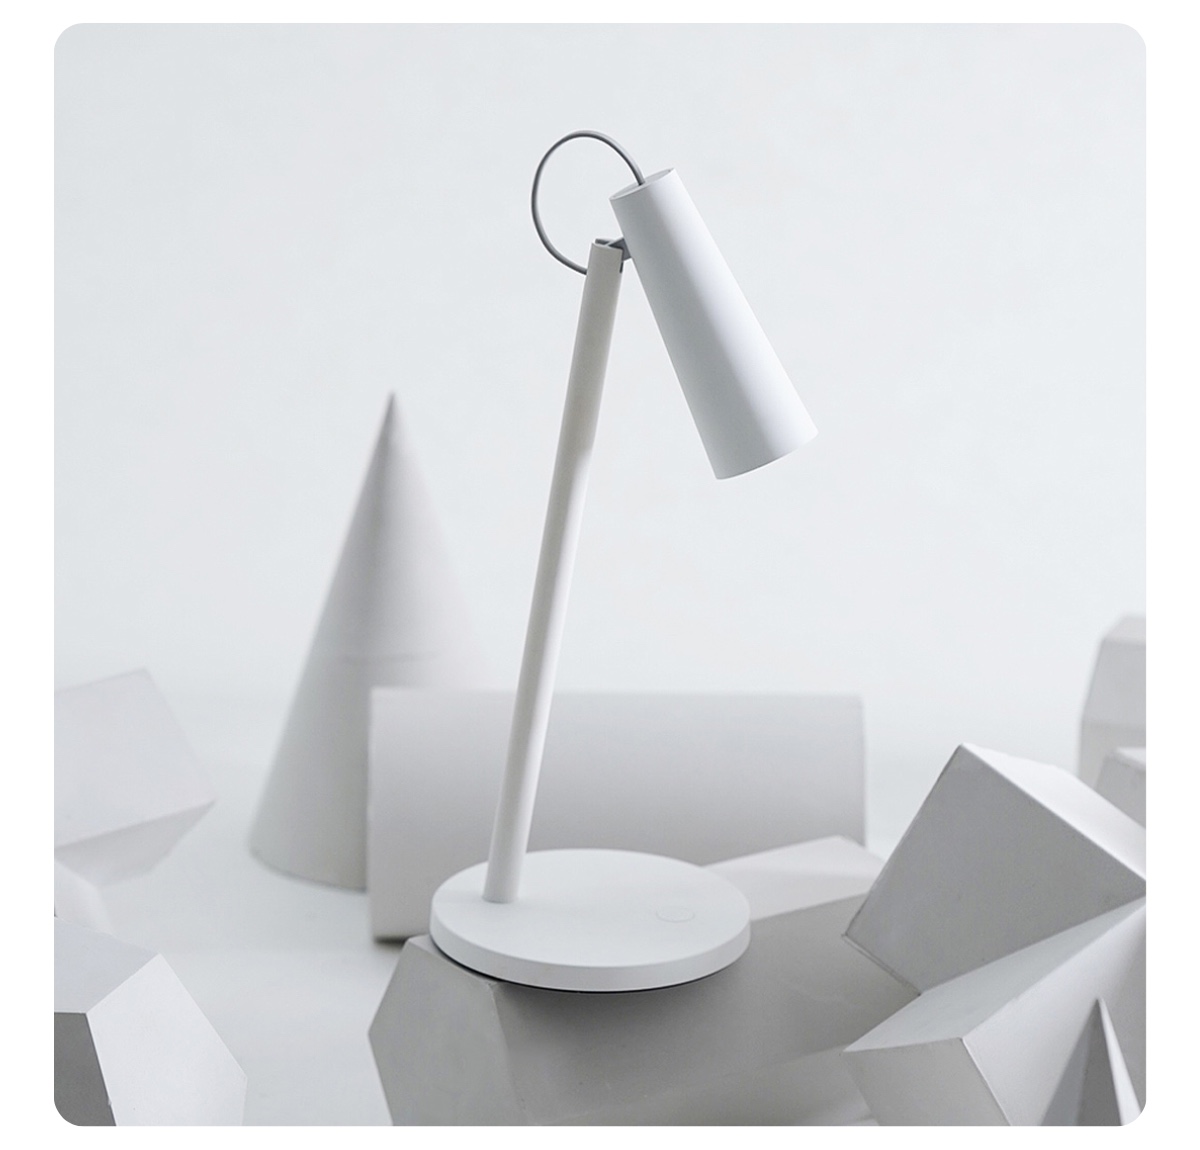 XiaoMi-Mijia-Rechargeable-LED-Table-Lamp-MJTD04YL-06